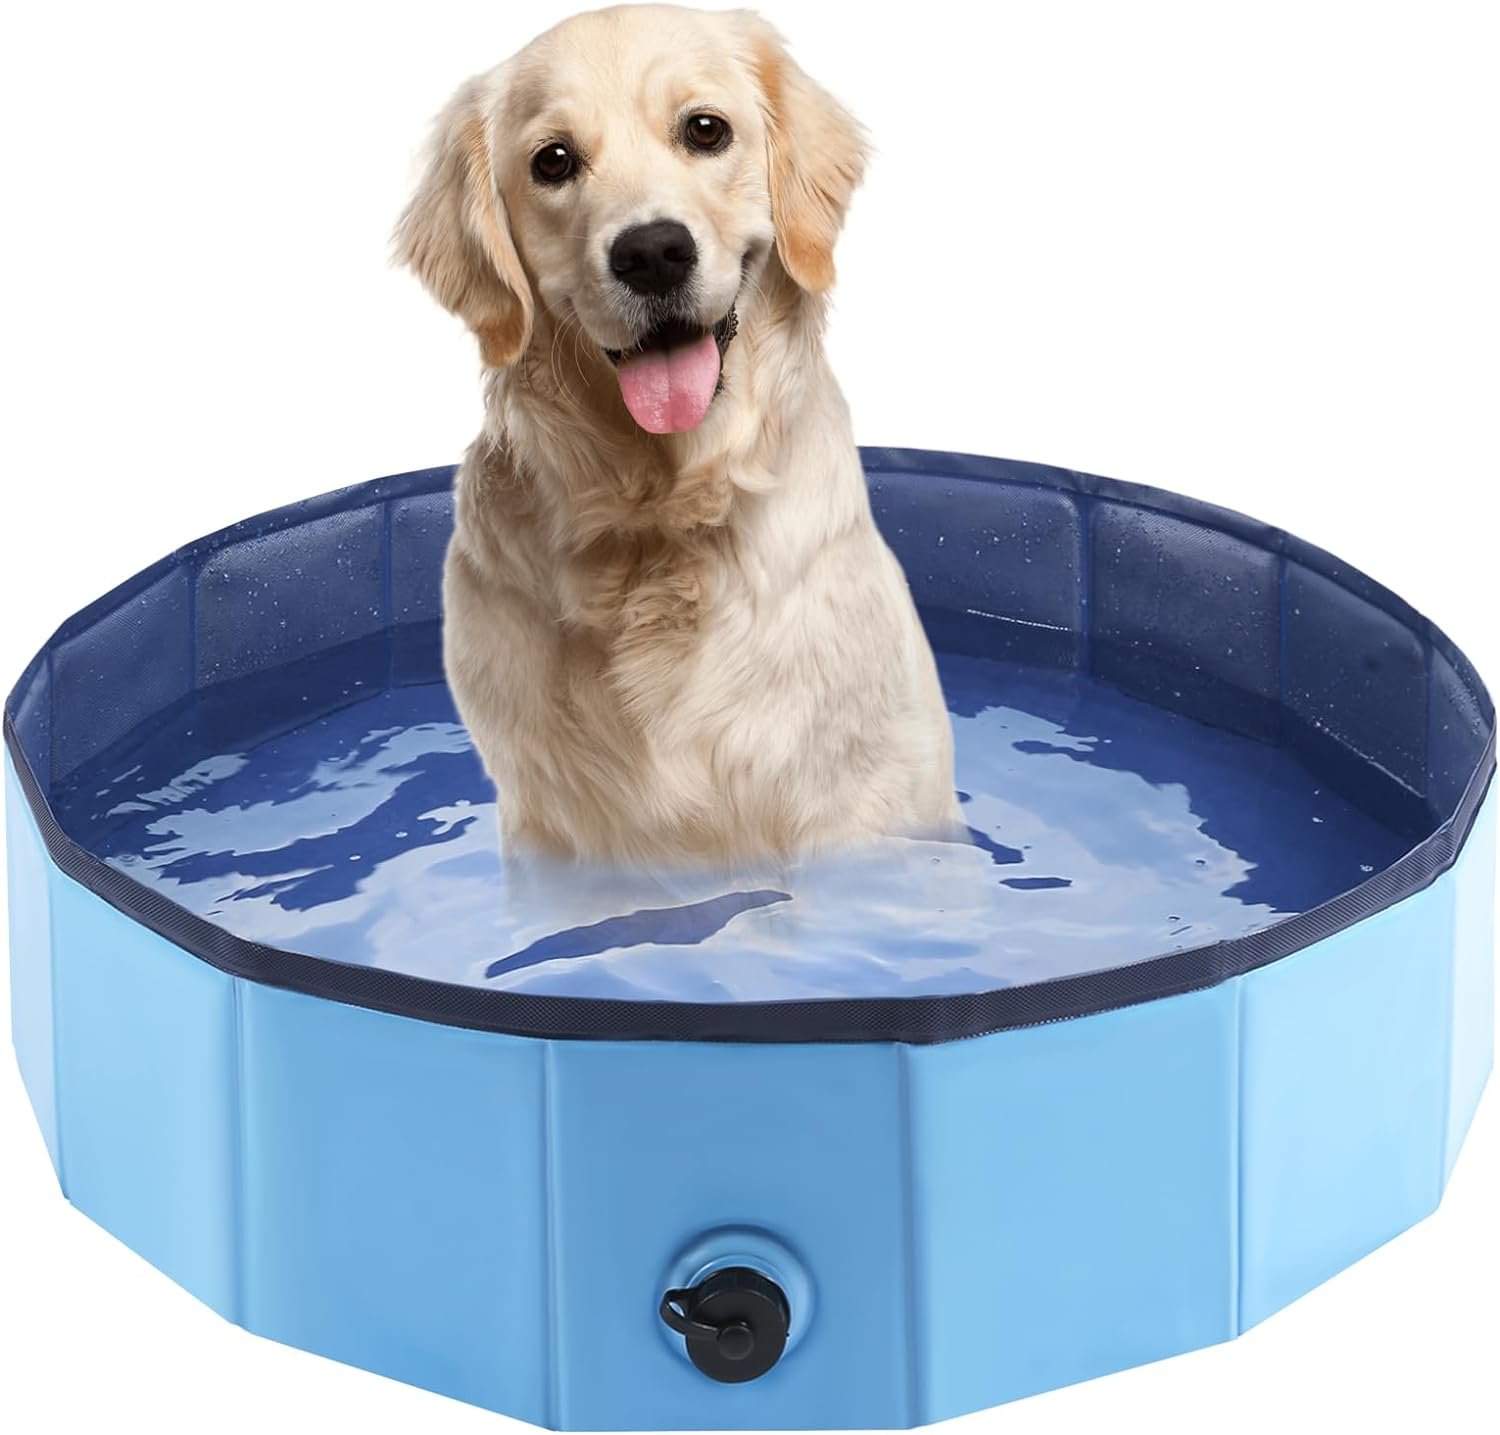 Eooqi Foldable Dog Bath Swimming Pool Plastic Kiddie Pool Professional Tub Collapsible Grooming Bathtub for Pets Kids Baby and Toddler, 32 x 8 Inches Blue